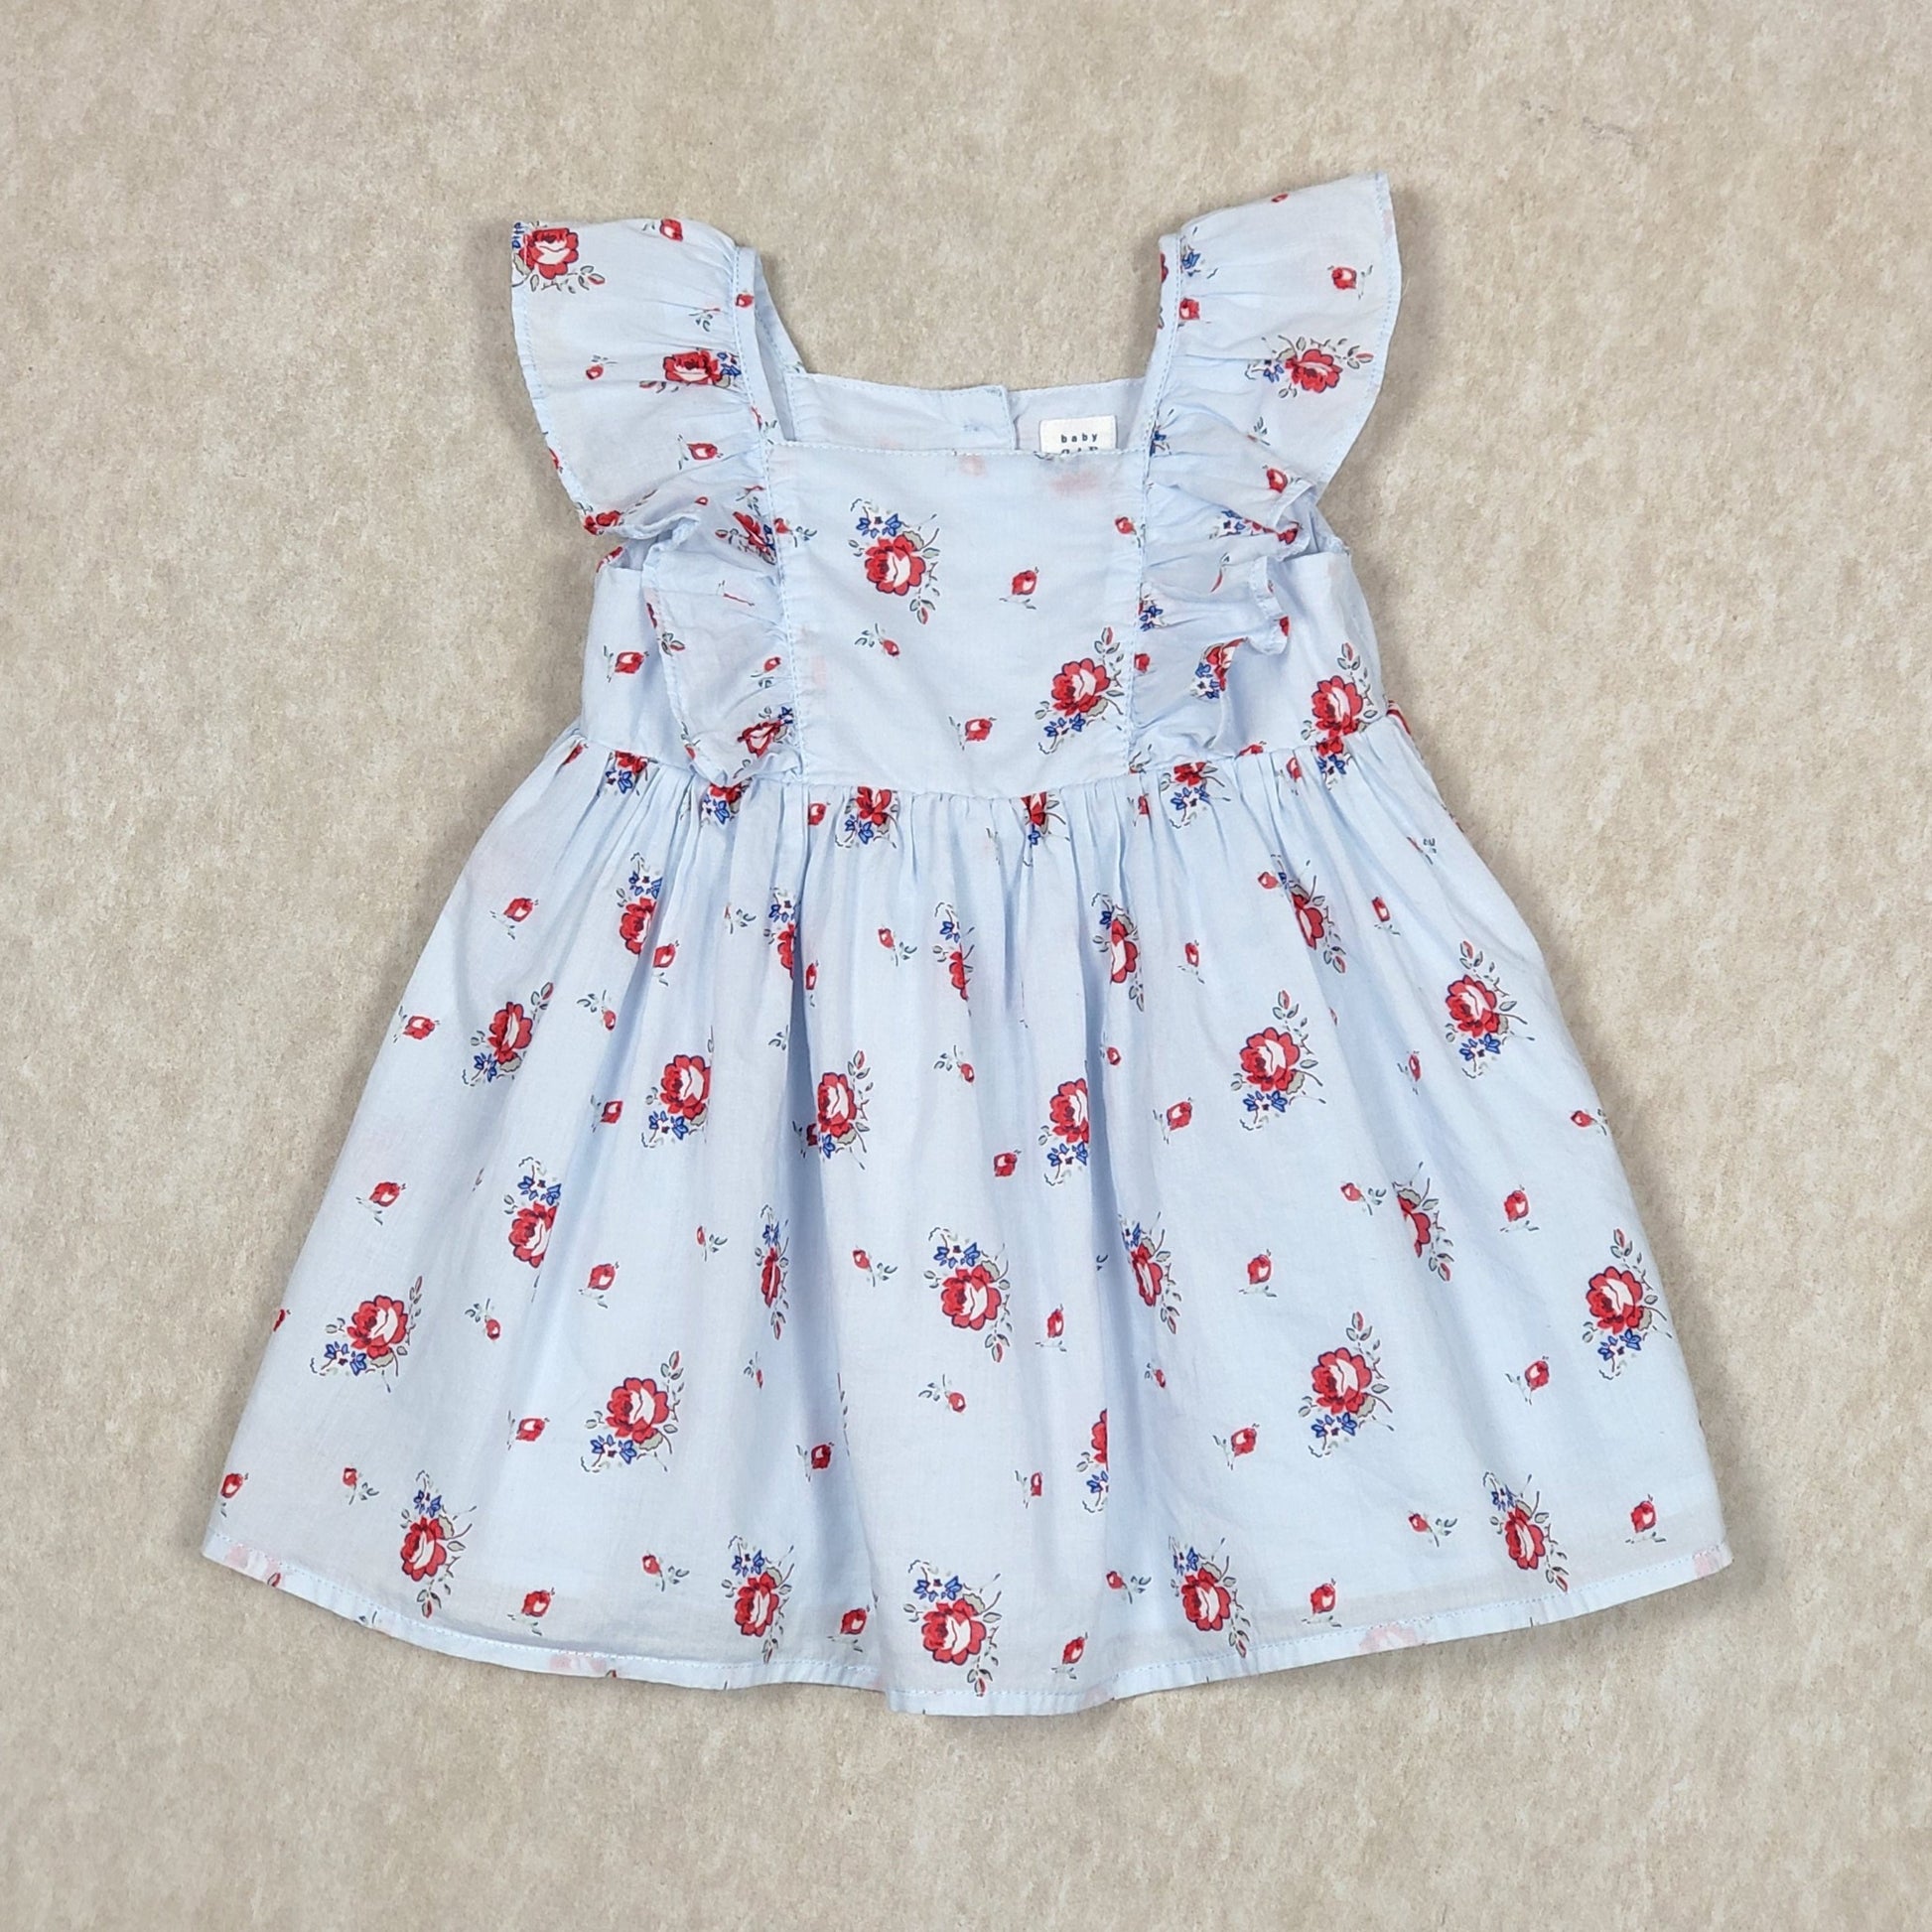 Baby Gap Girls Light Blue Floral Dress 6M Used, front